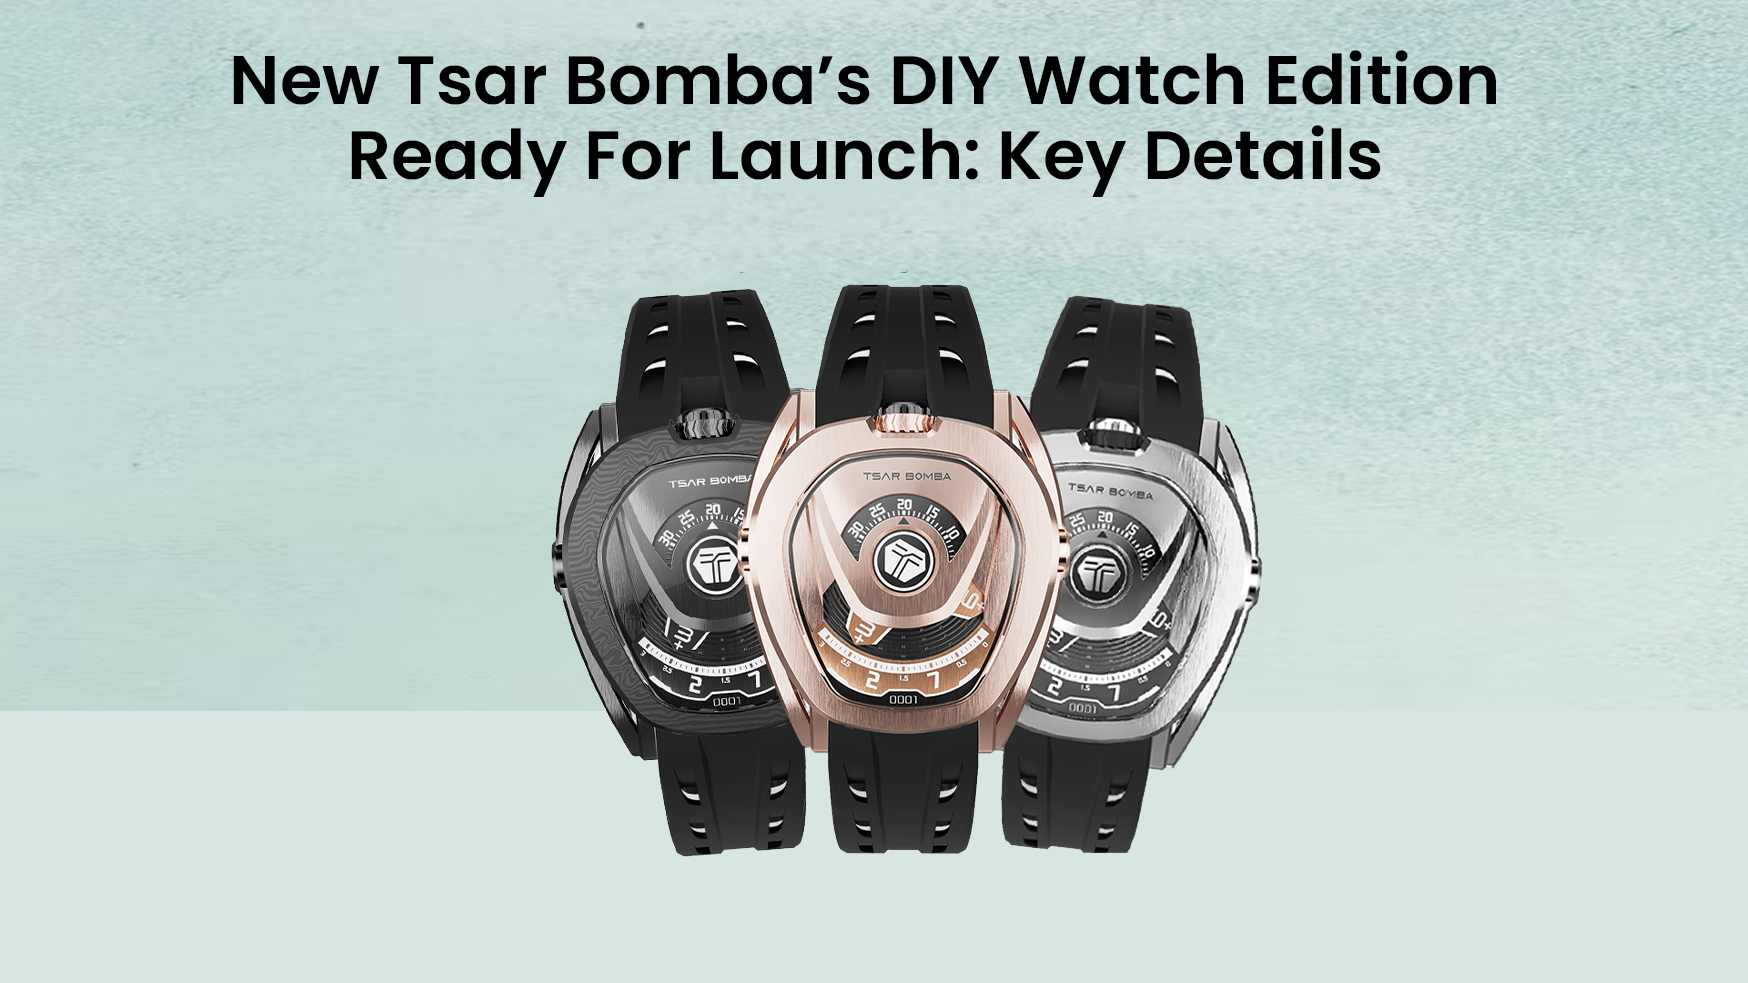 New Tsar Bomba’s DIY Watch Edition Ready For Launch: Key Details